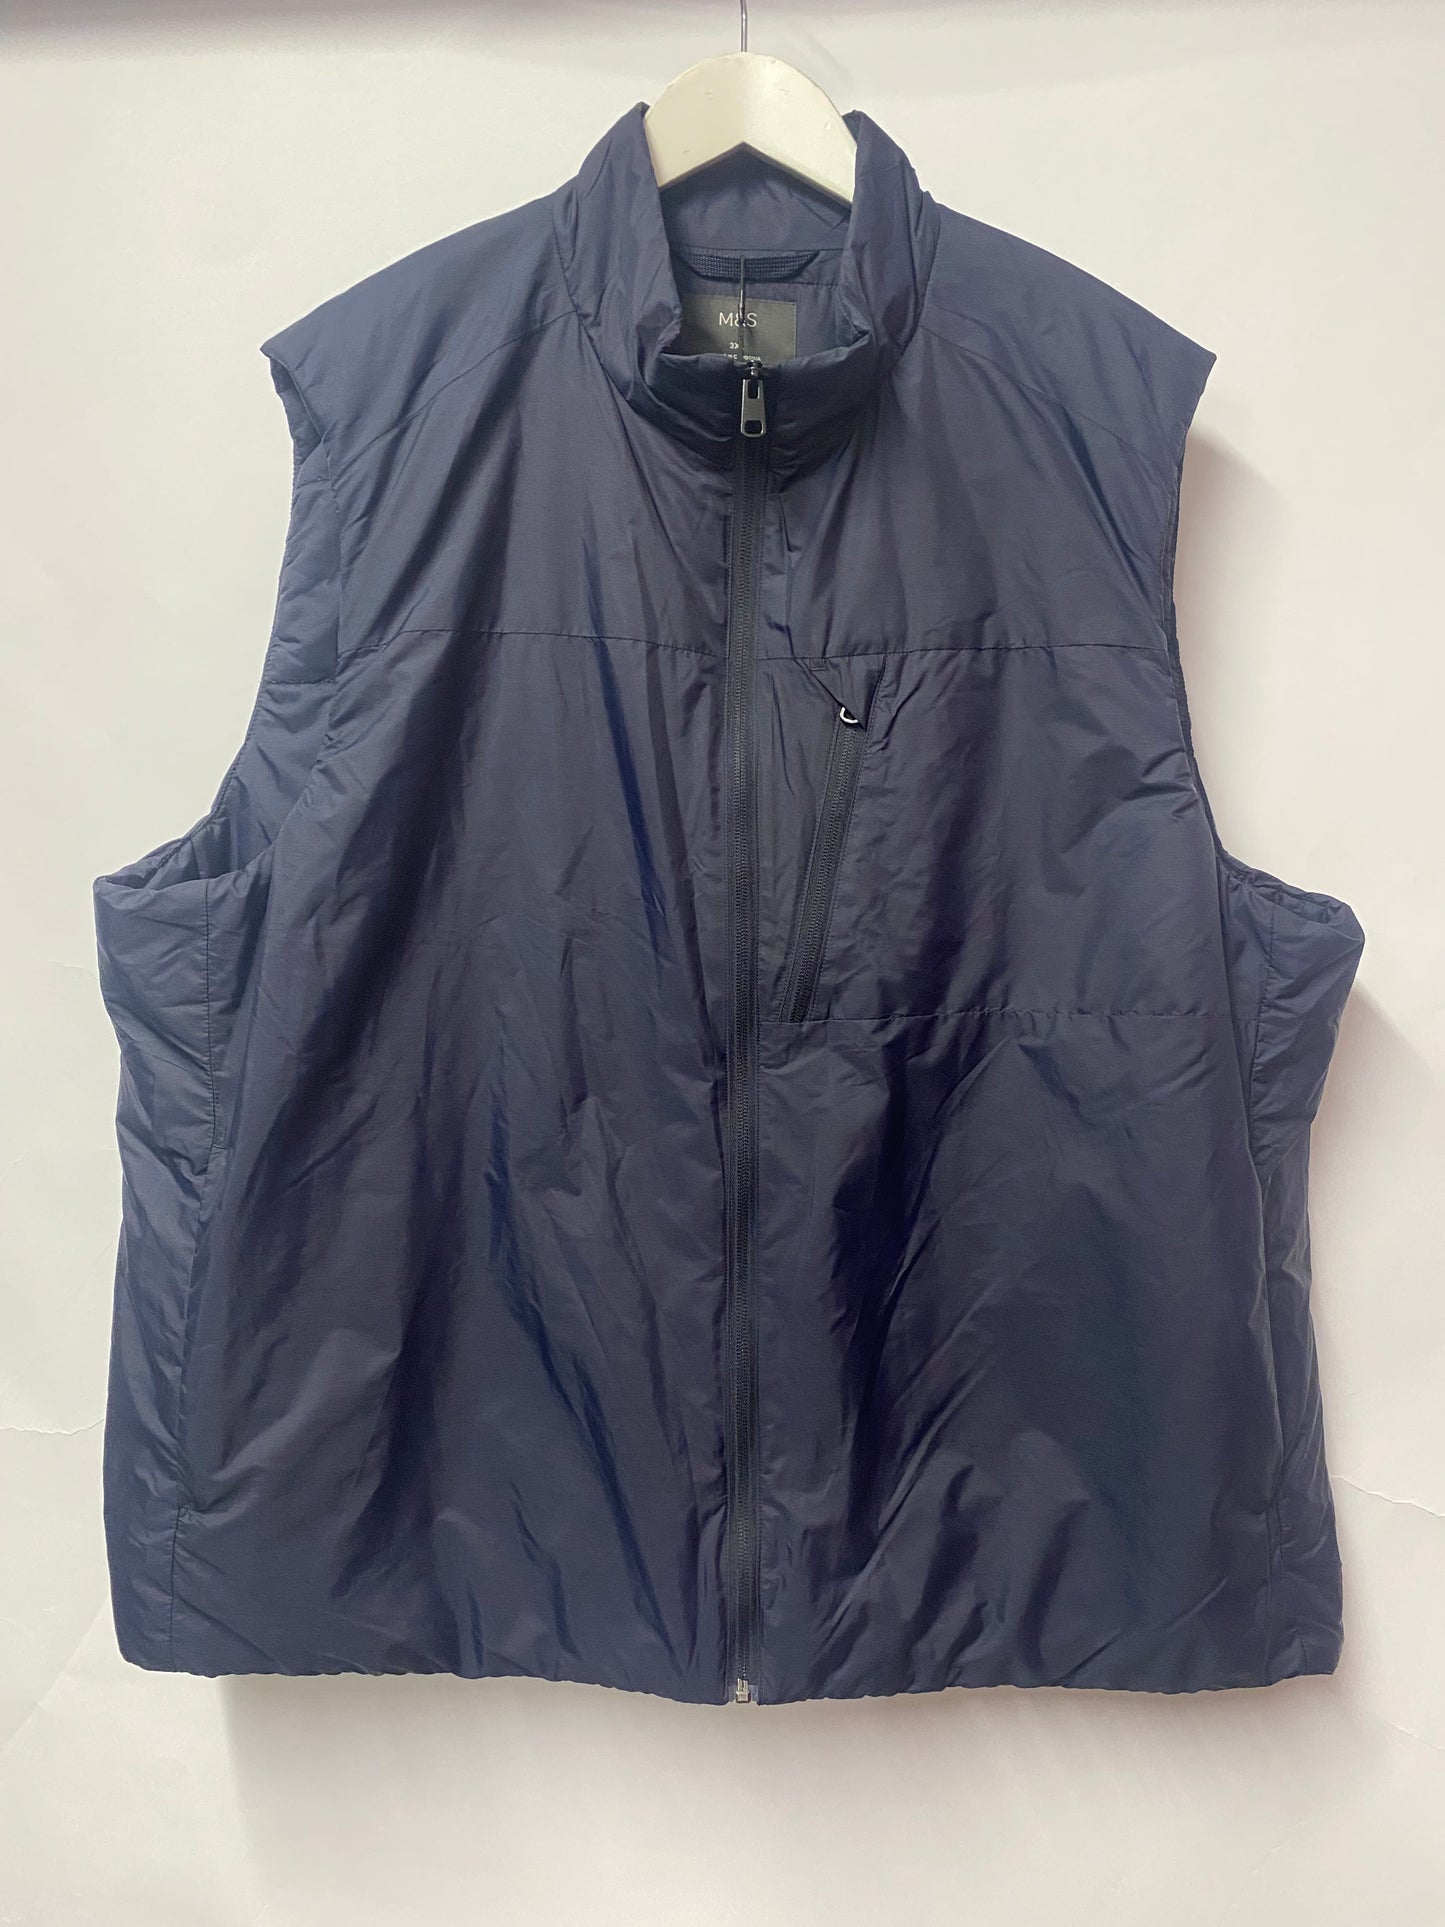 Marks and Spencer Navy Padded Gilet 3XL BNWT